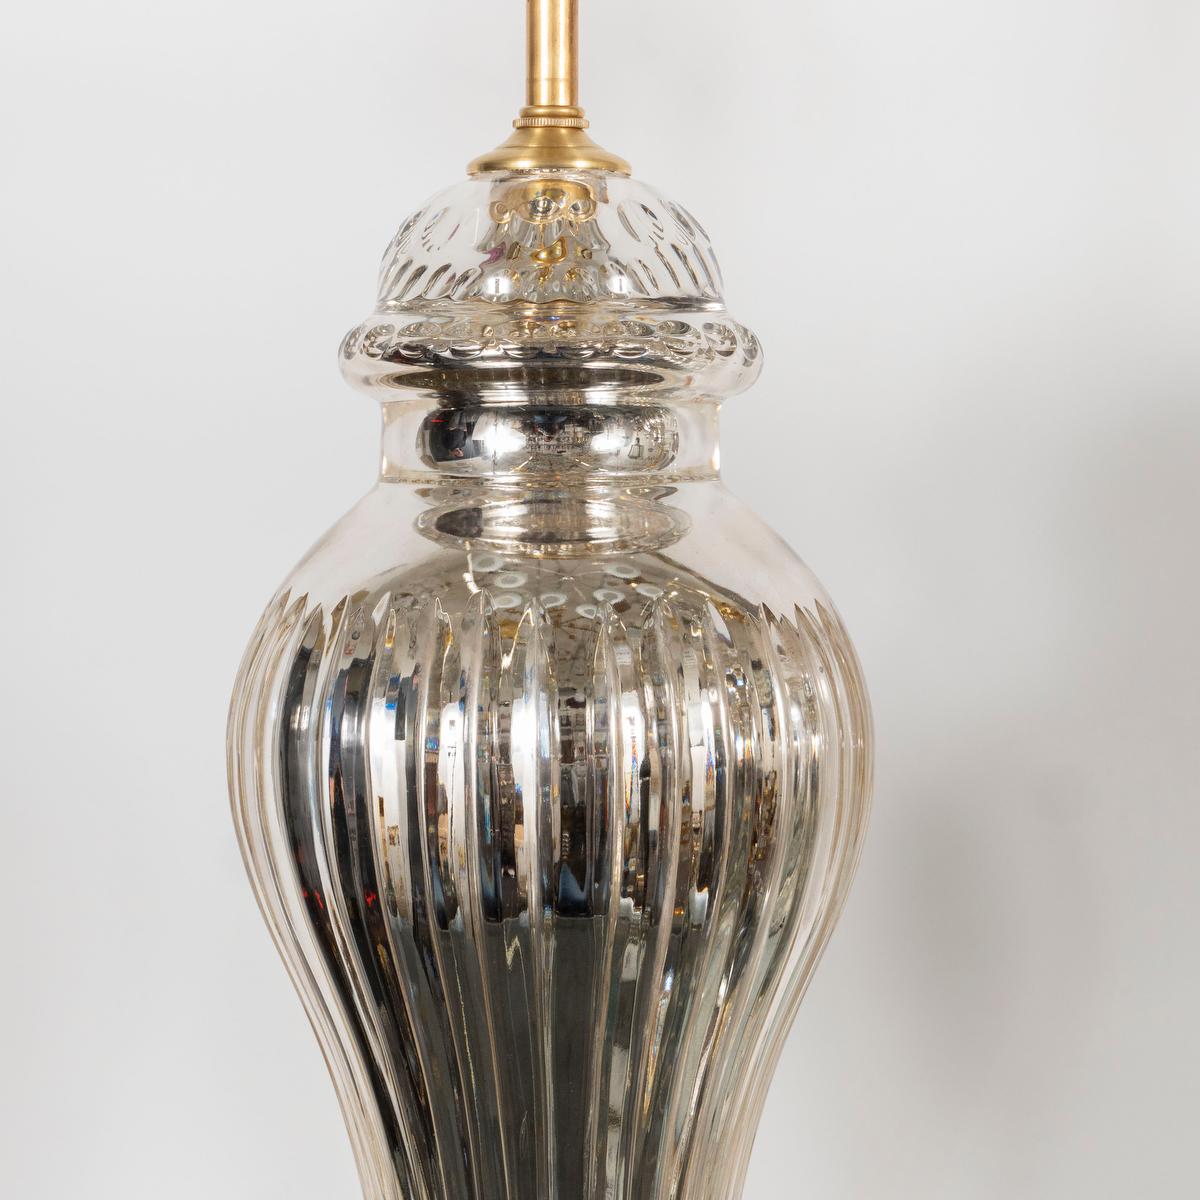 Mid-20th Century Pair of Fluted Urn-Shaped Mercury Glass Lamps For Sale